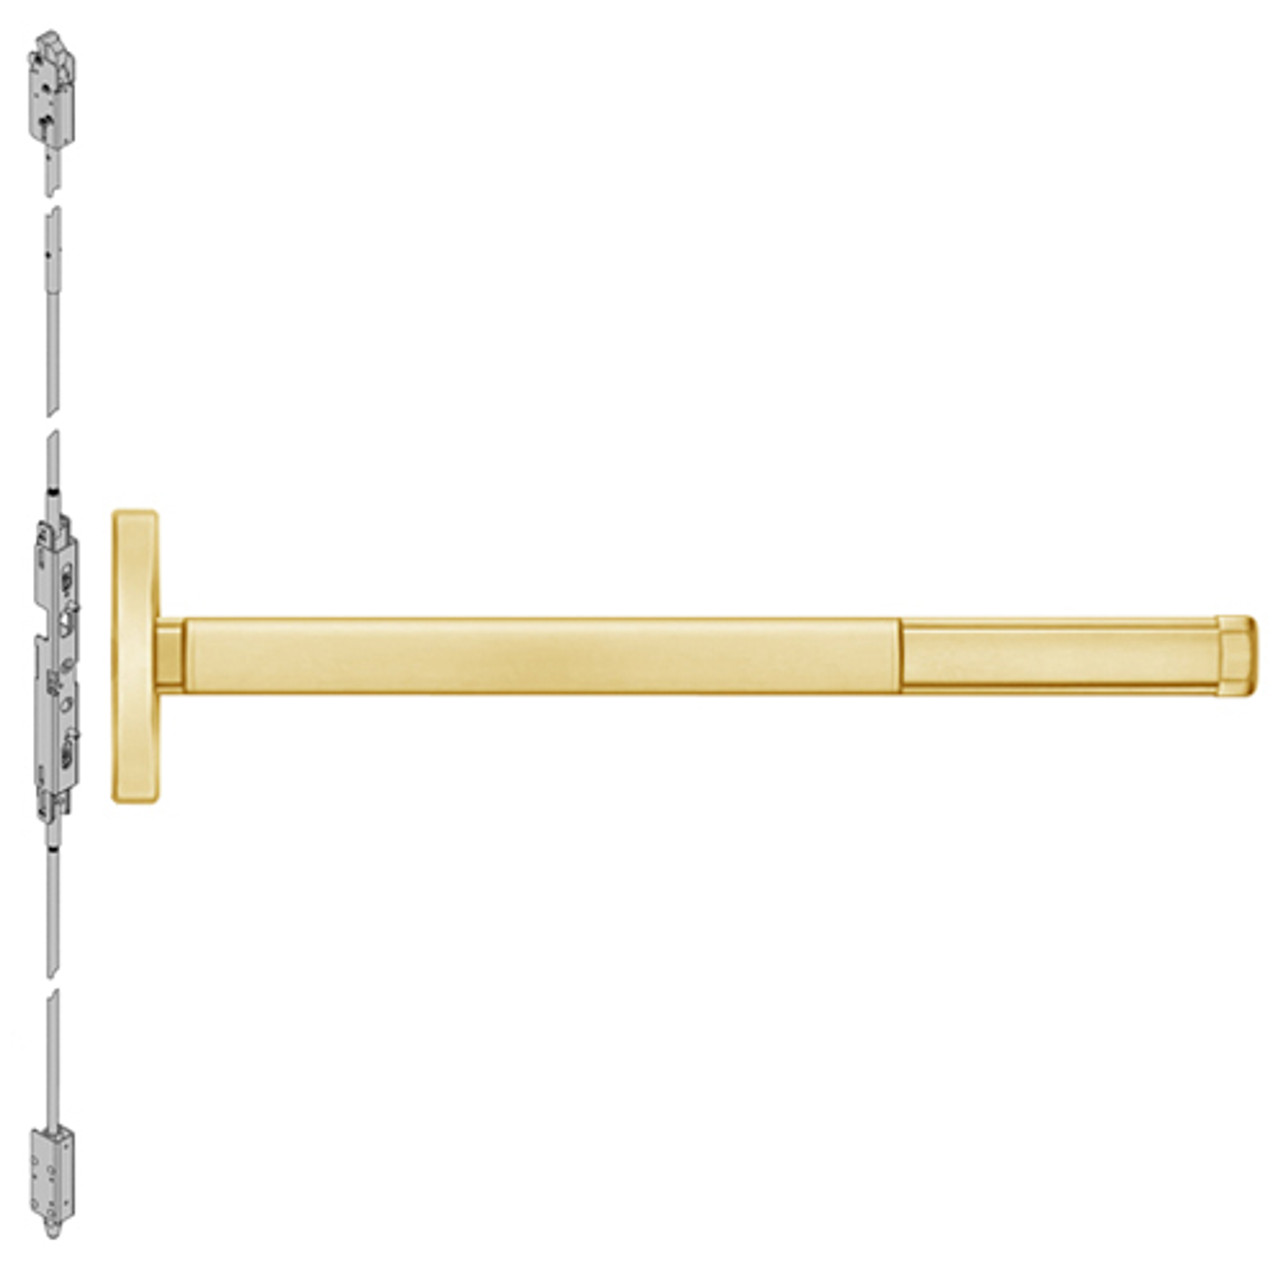 TSFL2614-605-36 PHI 2600 Series Fire Rated Concealed Vertical Rod Exit Device with Touchbar Monitoring Switch Prepped for Lever Always Active in Bright Brass Finish